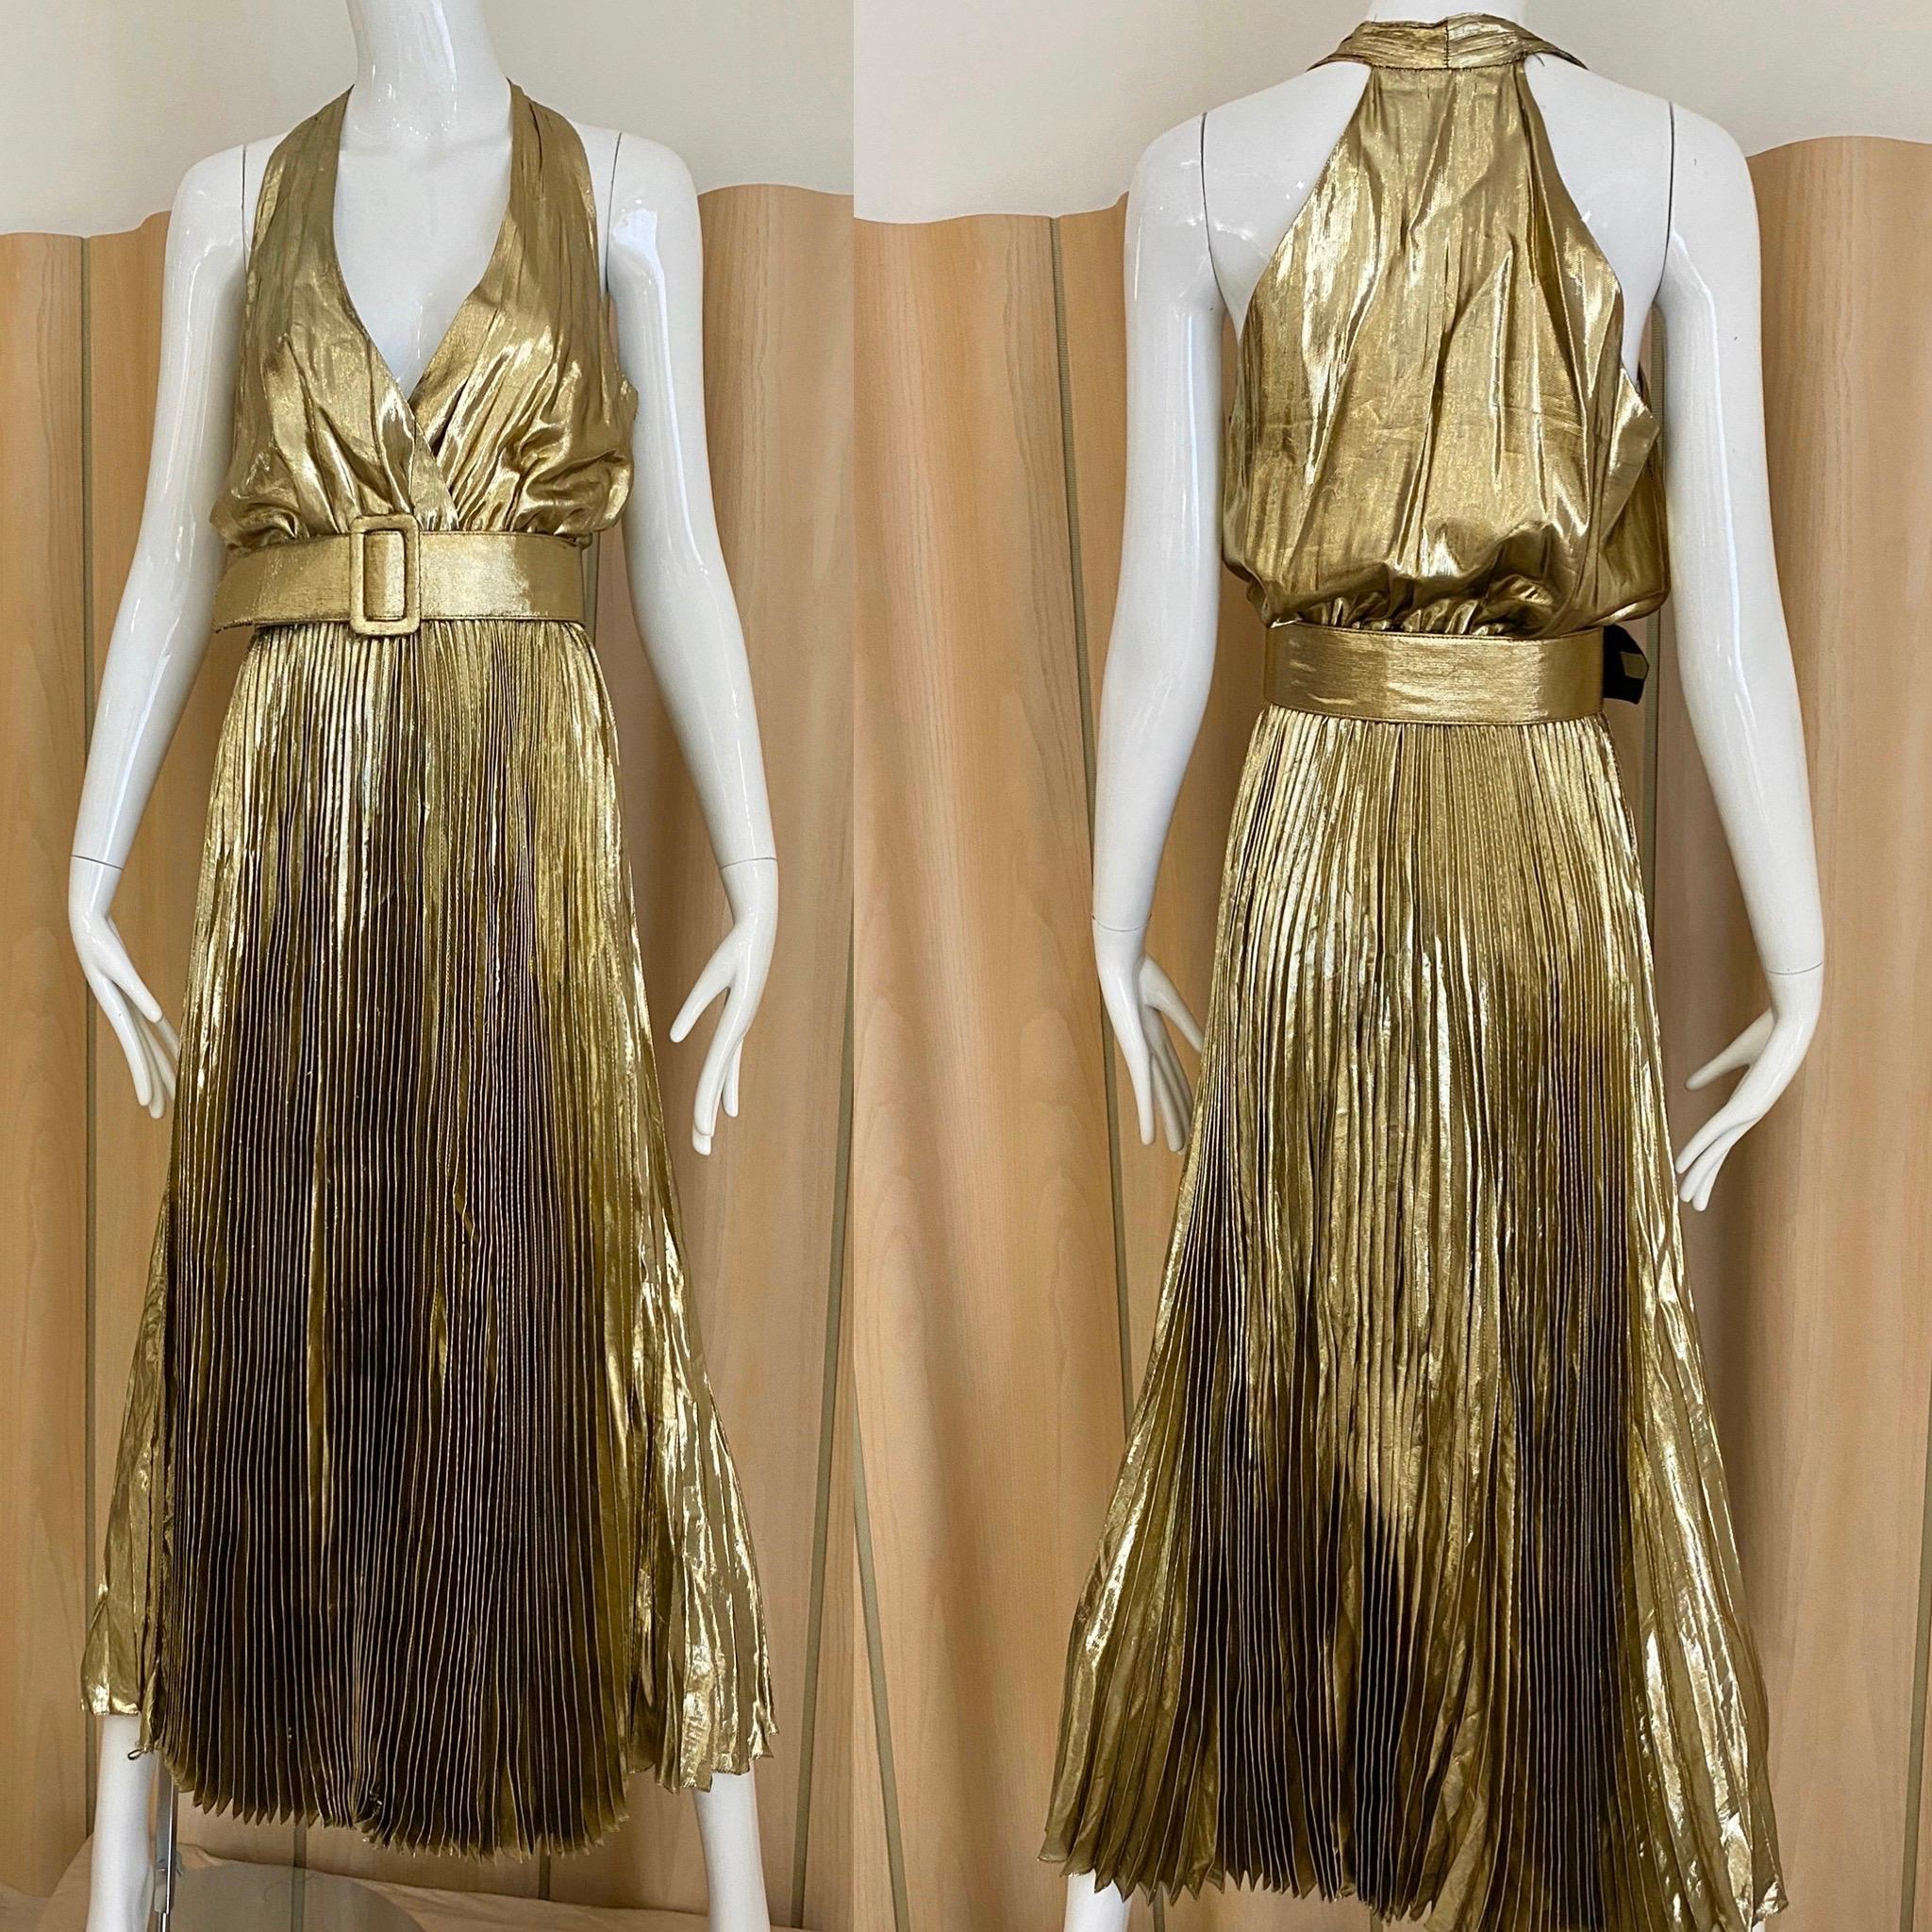 Vintage 70s gold lame halter V neck sleeveless pleated dress with elastic waist and belt.
Bust: 36/ Waist stretch to 32”. Perfect for studio 54 party 
Fit size small to medium
** flaws: see belt